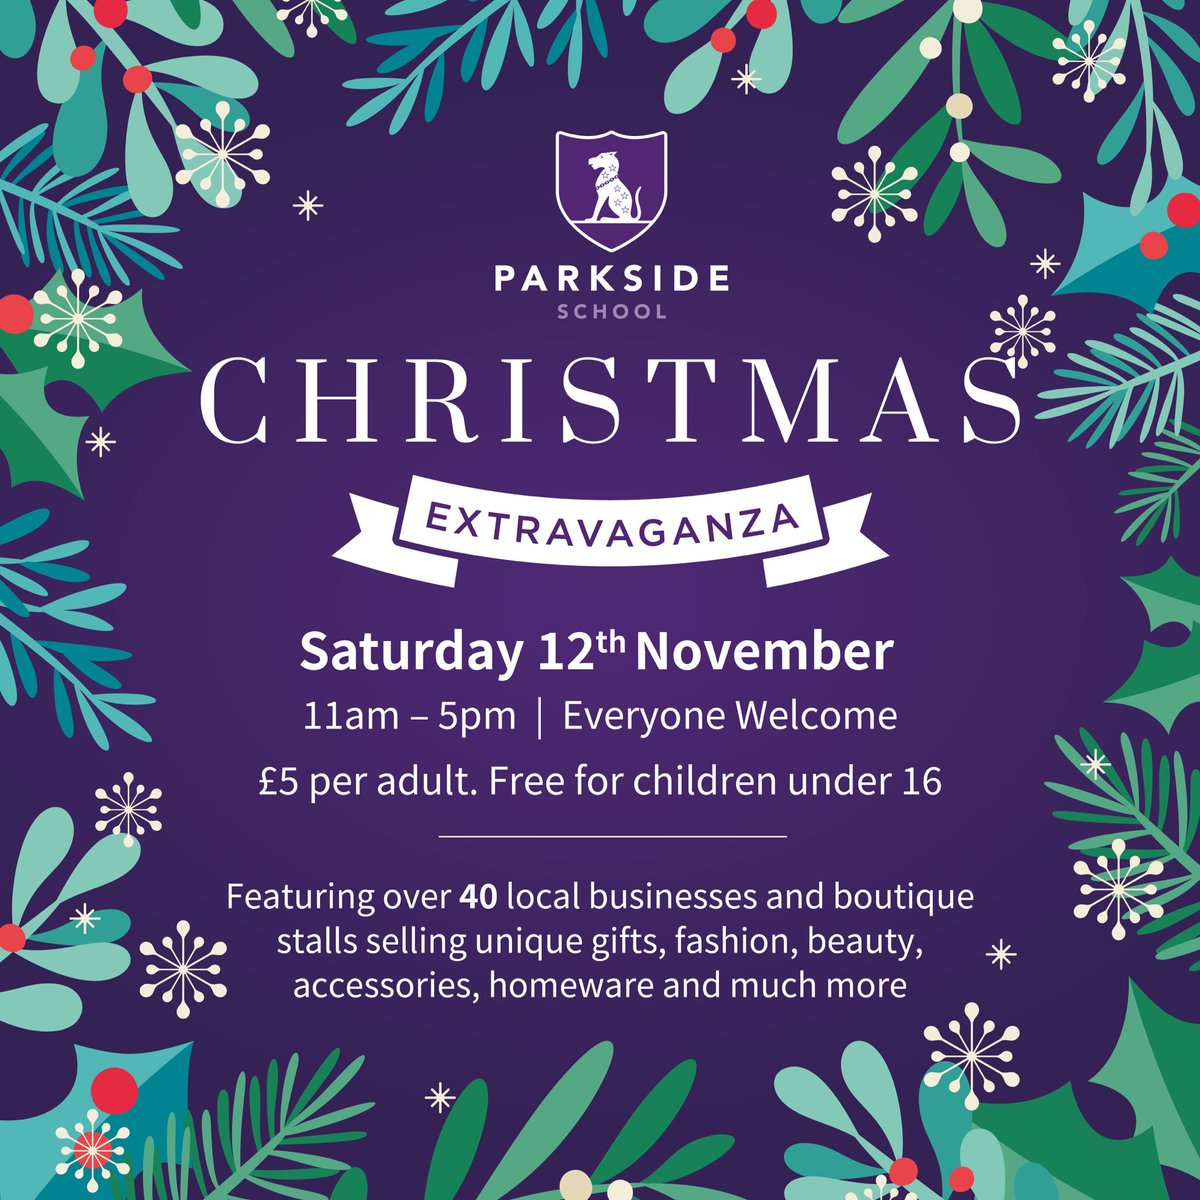 Holidays are coming🌲Join Parkside for a day of luxury shopping and fun including Christmas Food Garden and Children’s Zone complete with stalls, games, music and magic🌲#christmas2022 #christmas #christmasshopping #gifting #familydaysout #giftideas #festive